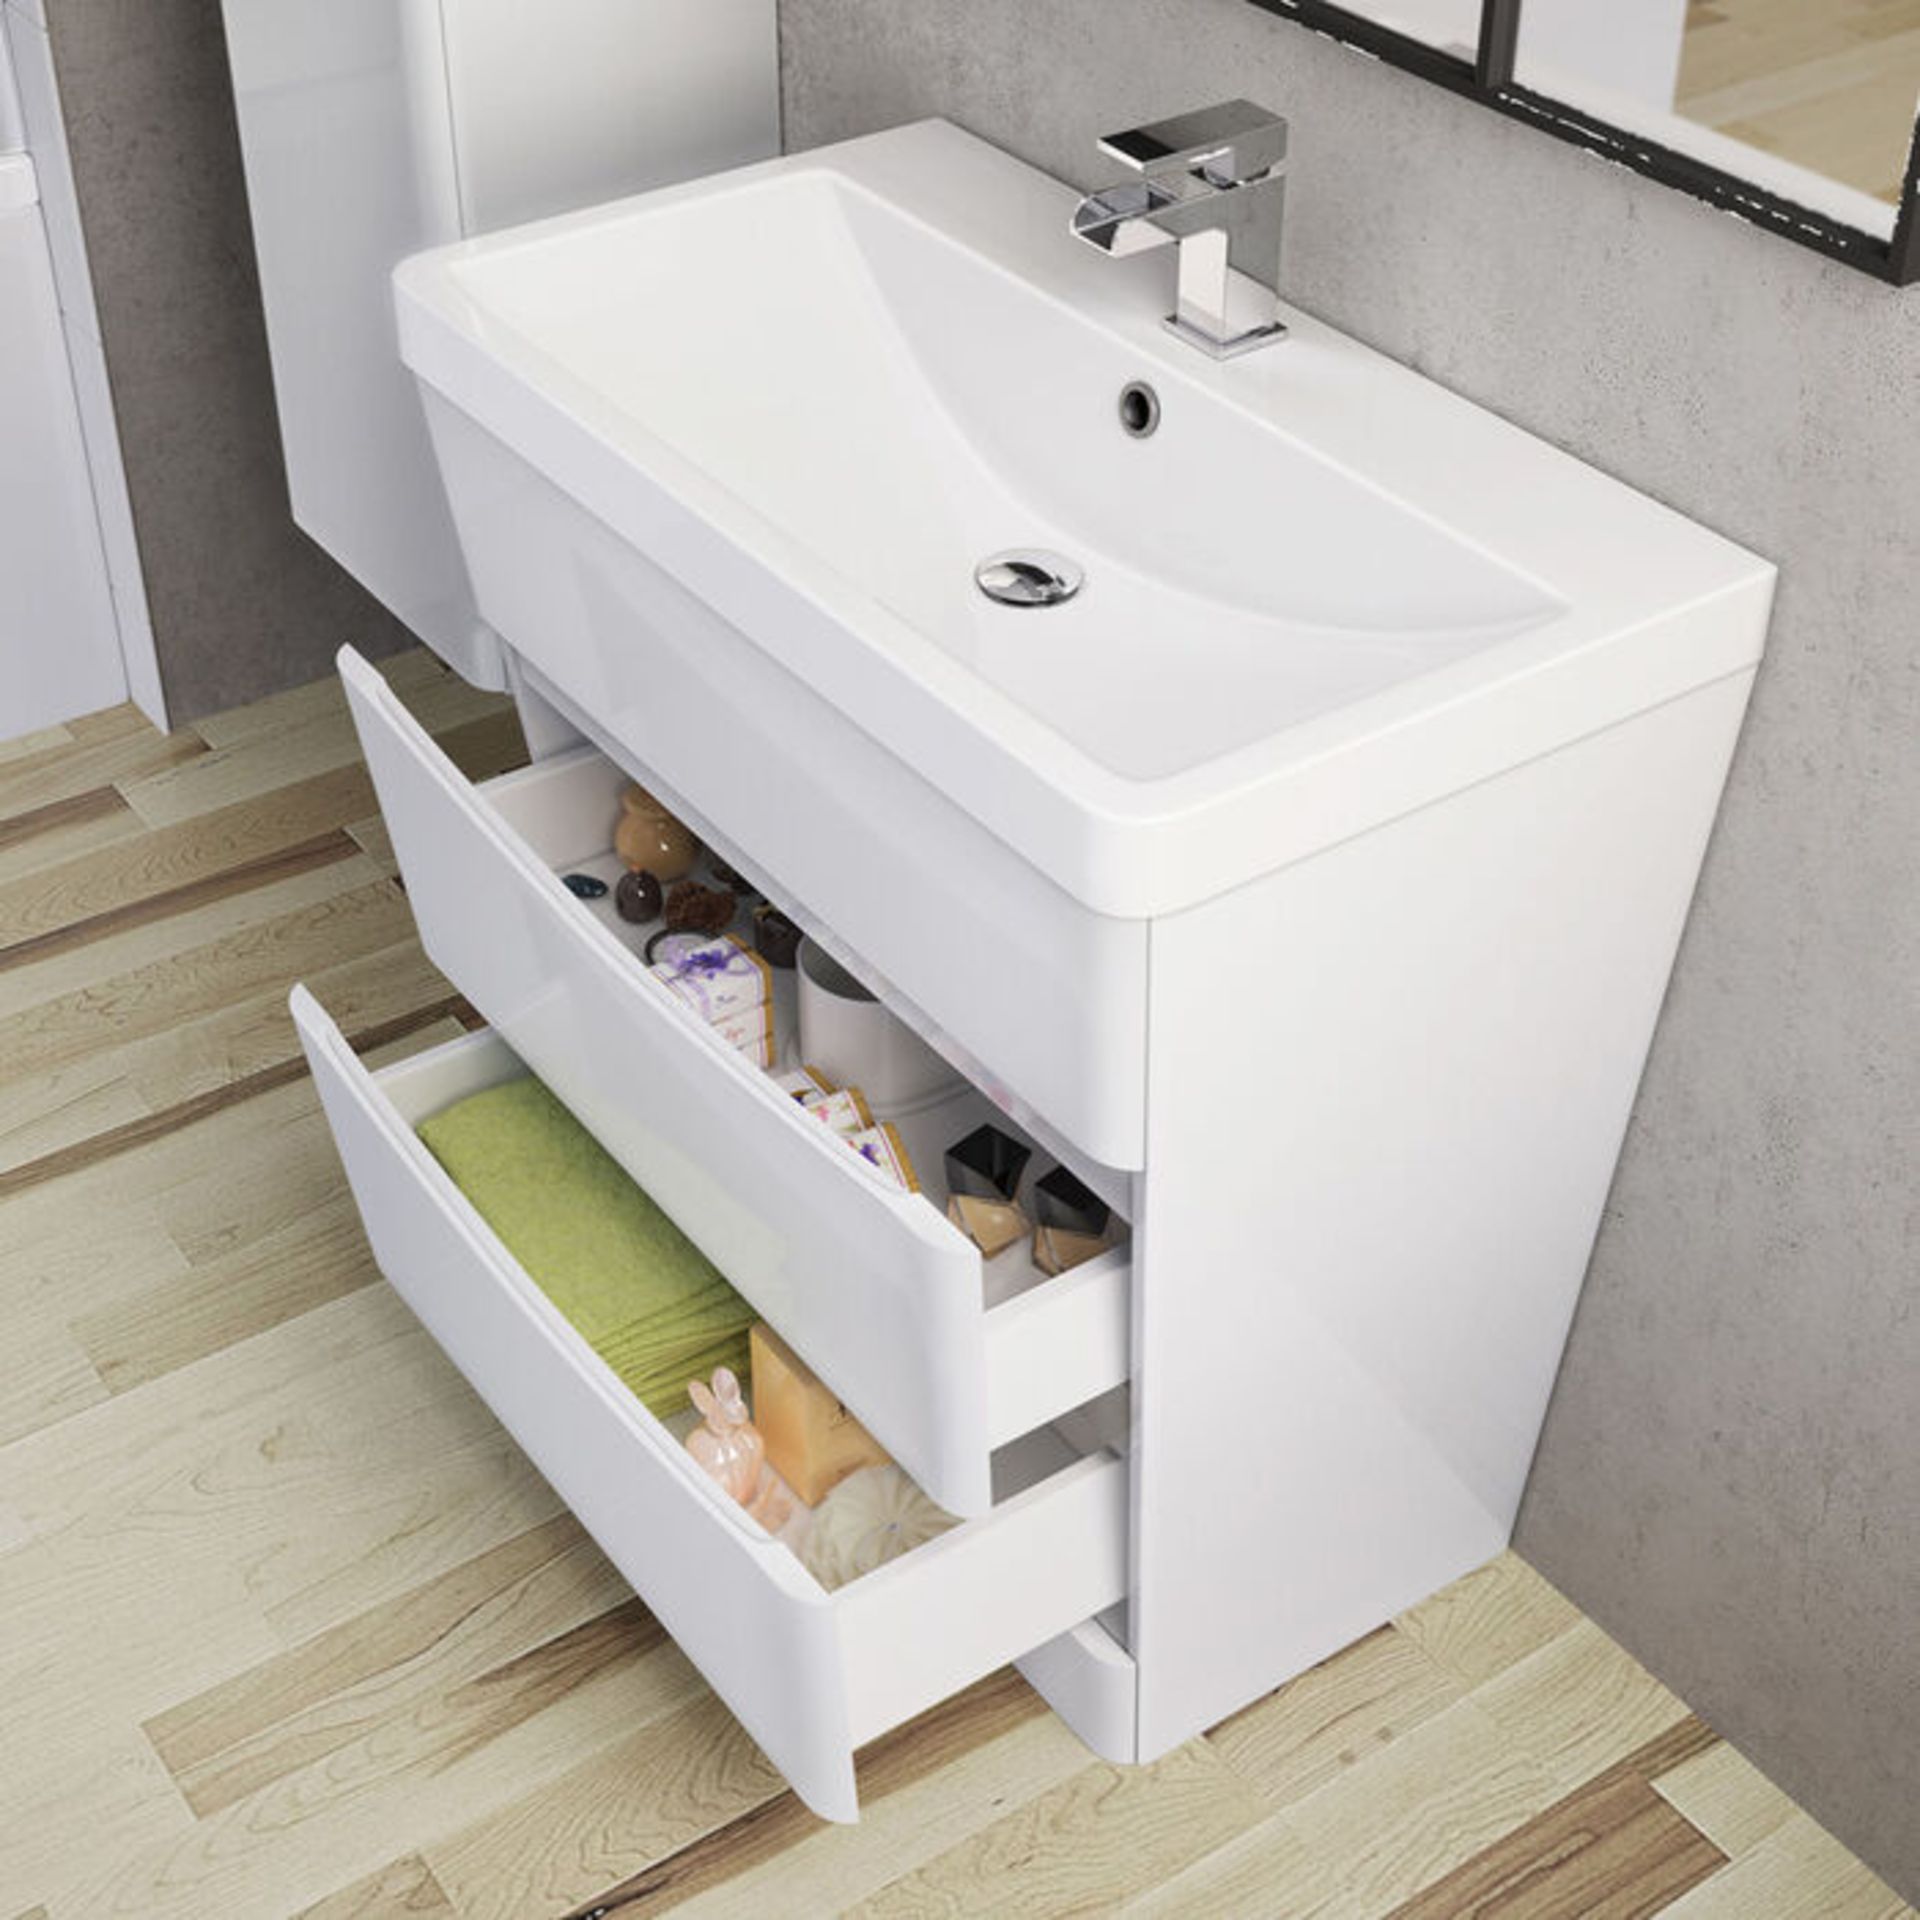 (DD14) 800mm Austin II Gloss White Sink Drawer Unit - Floor Standing. RRP £549.99. Comes compl... - Image 2 of 5